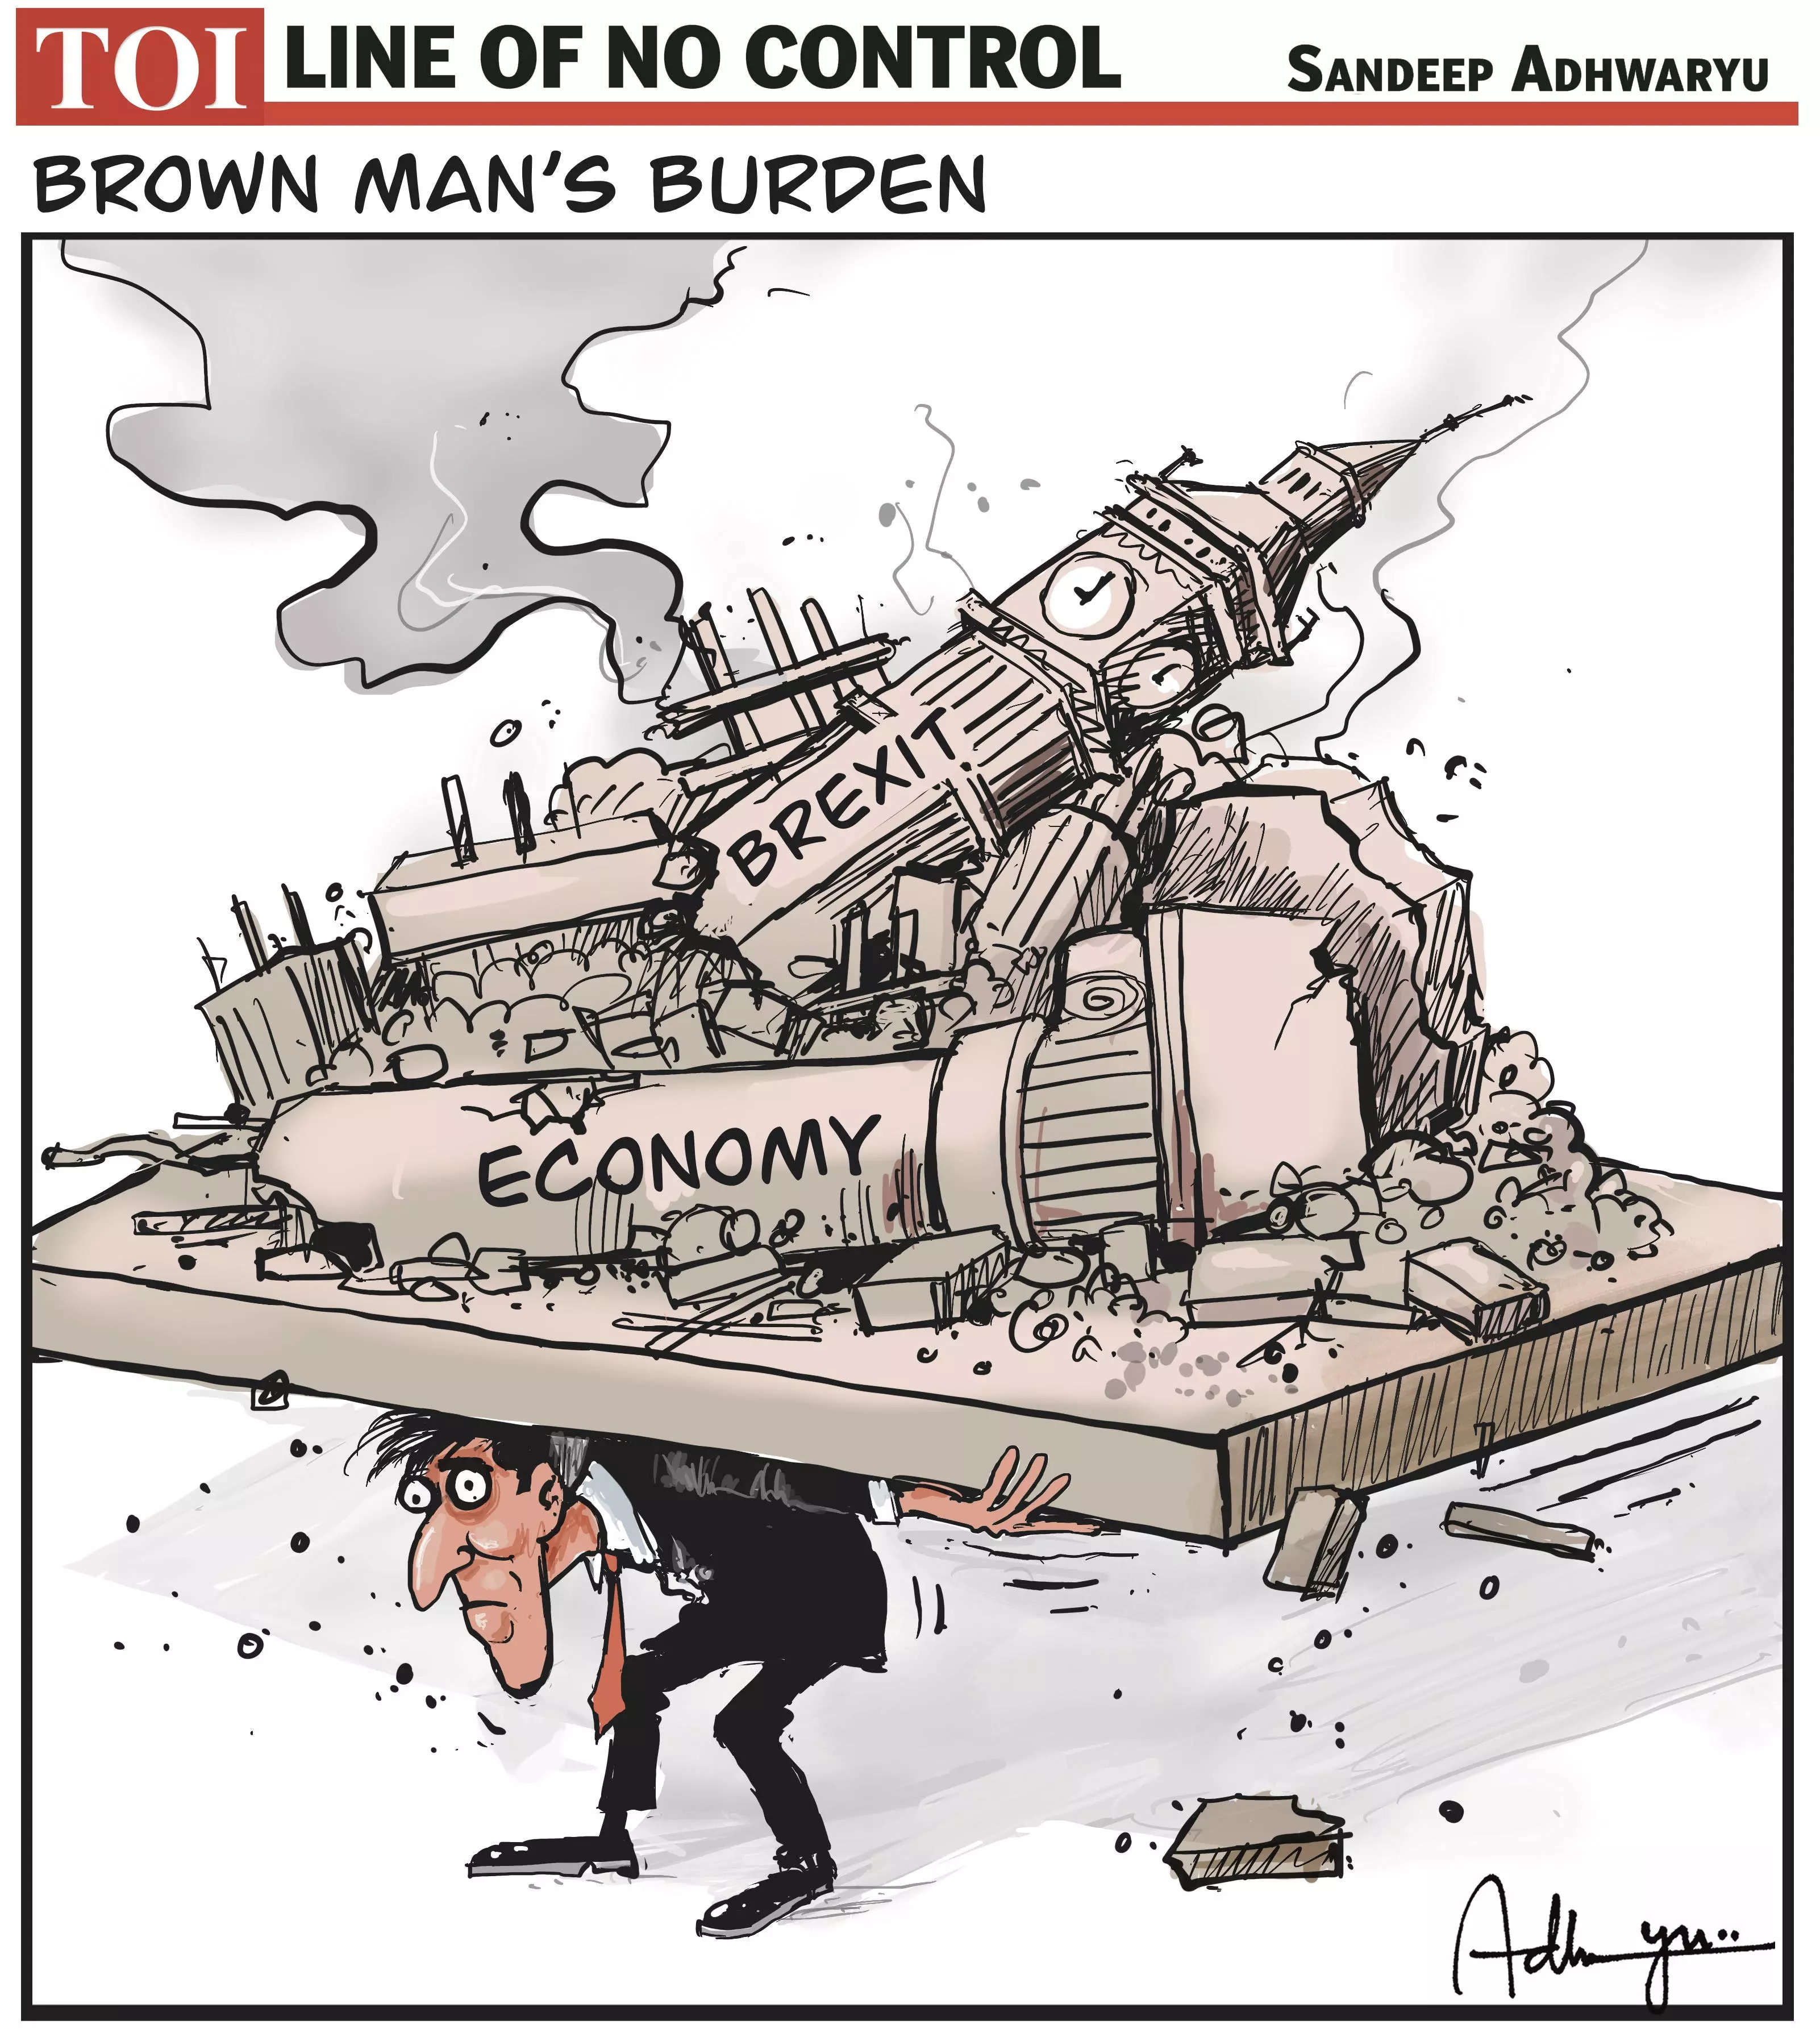 Brown man's burden | Times of India Mobile